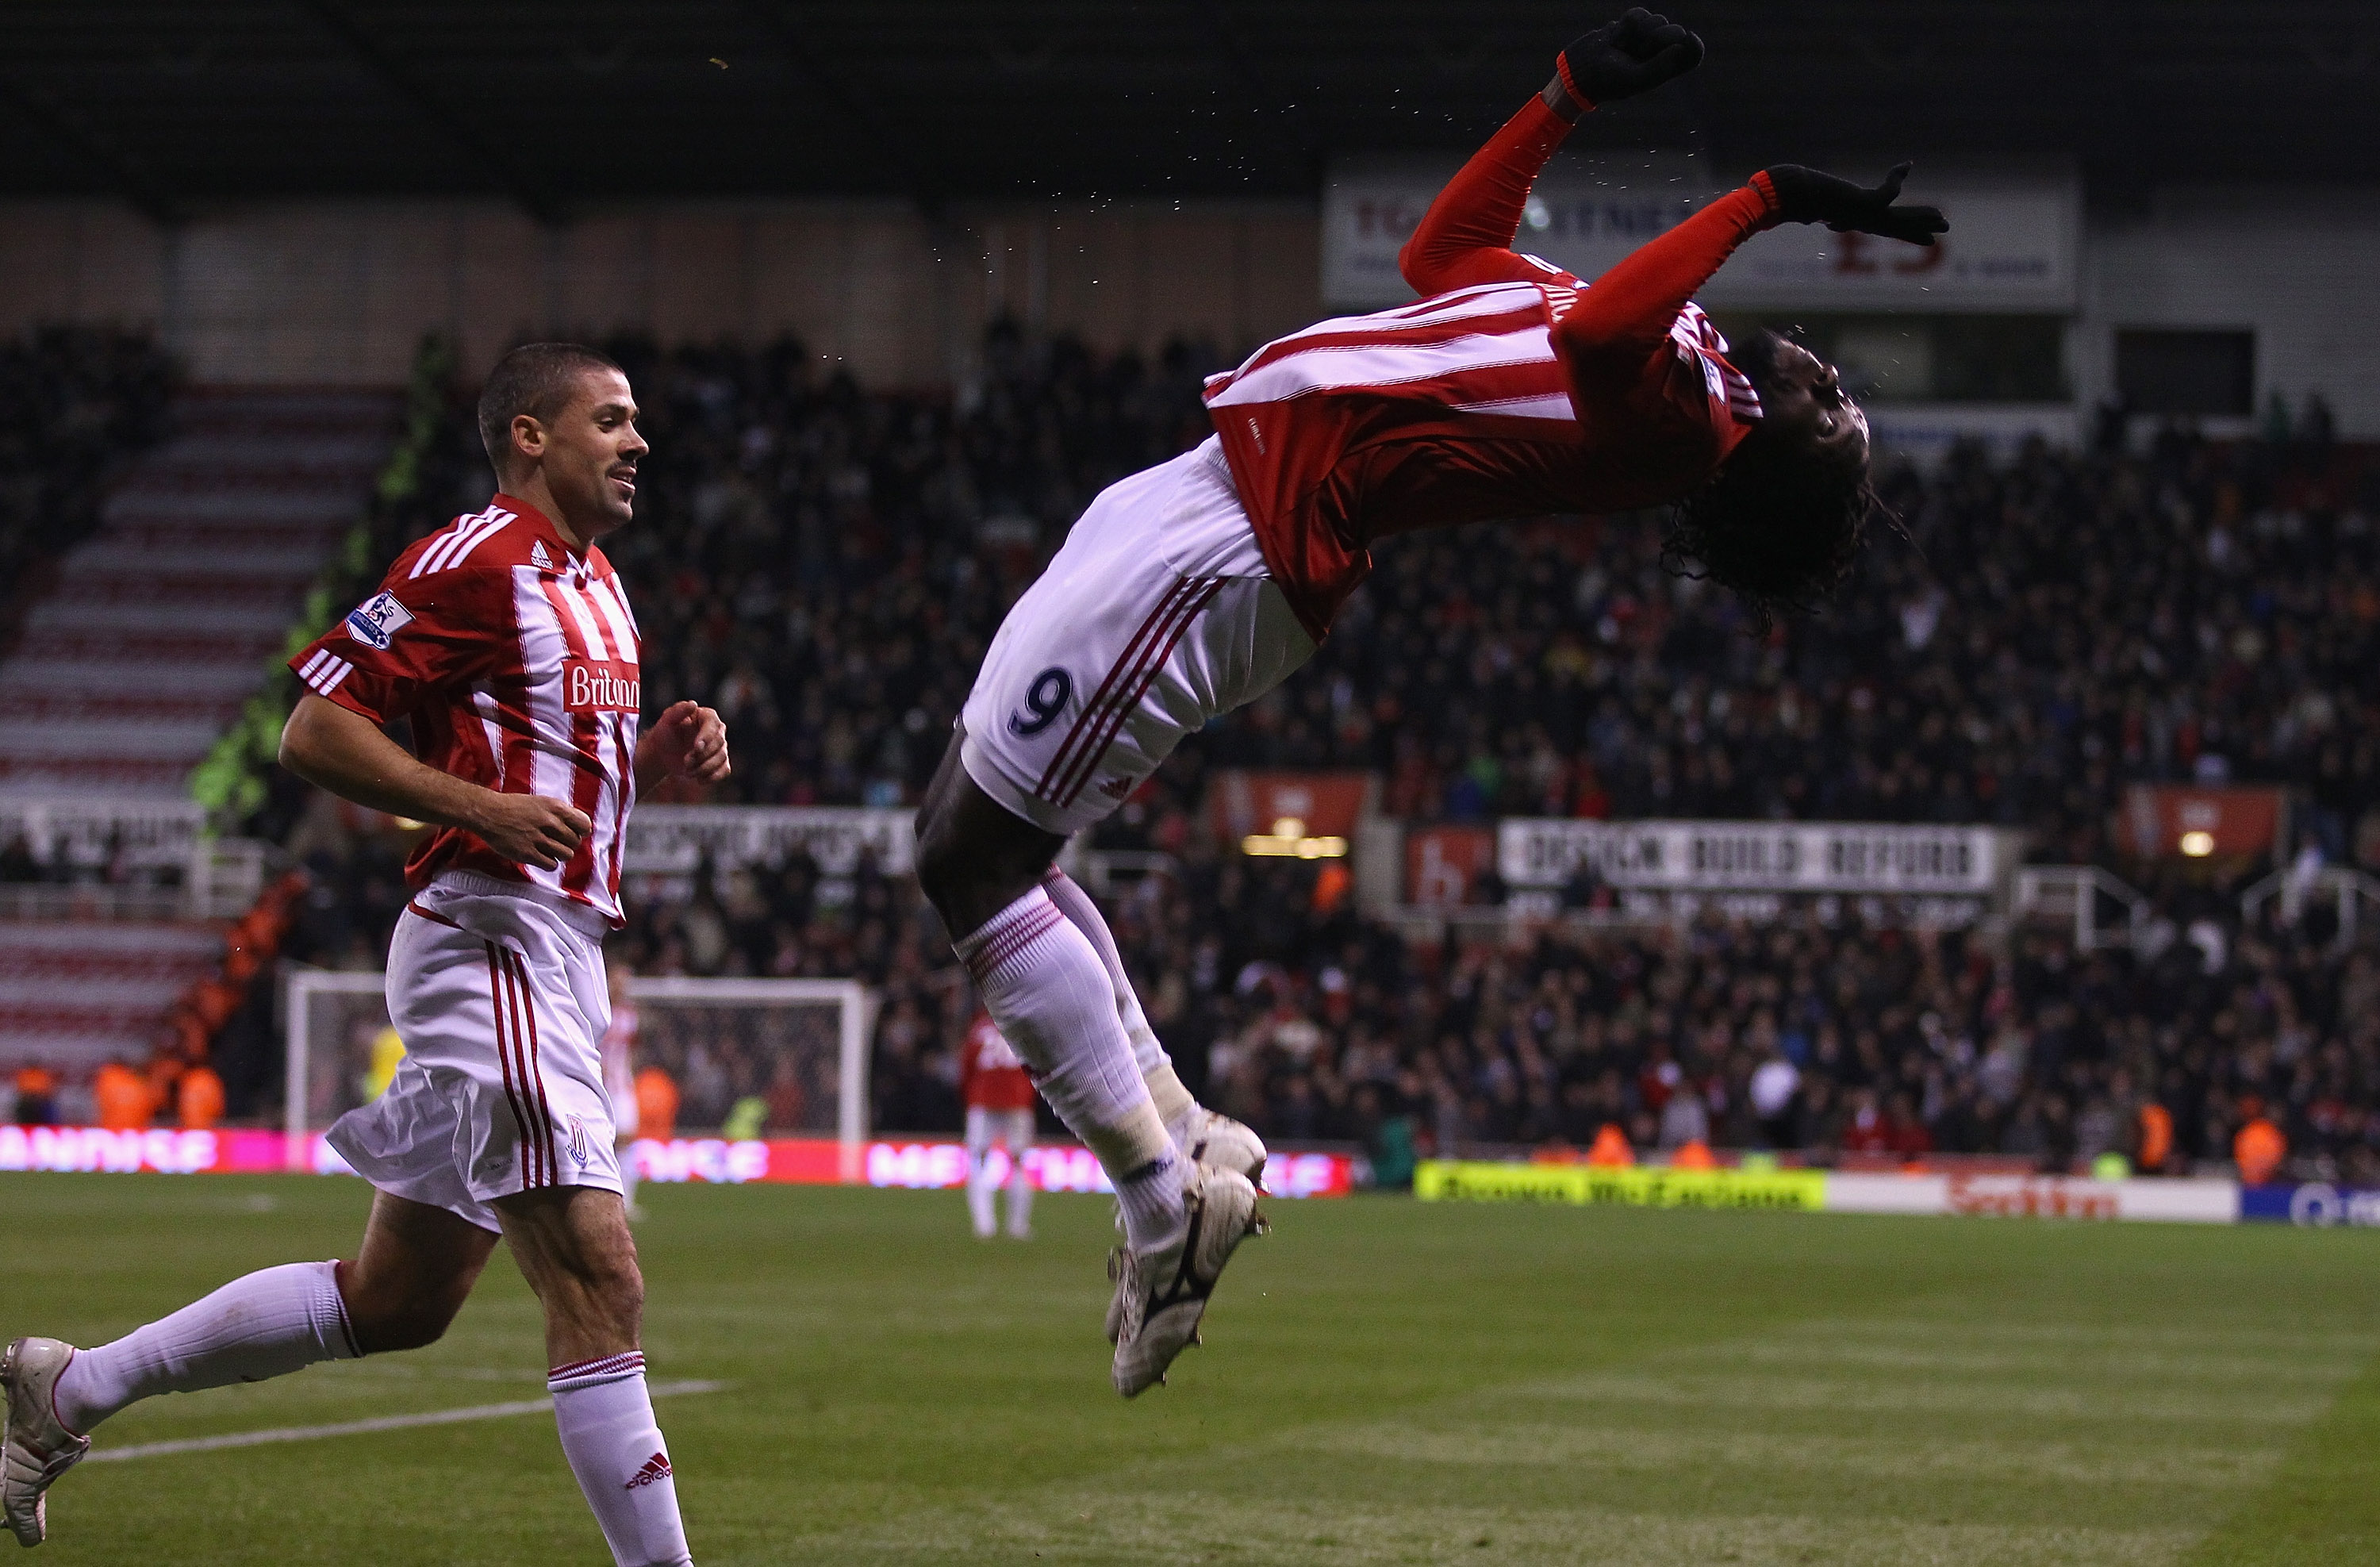 STOKE ON TRENT, ENGLAND - NOVEMBER 13:  Kenwyne Jones of Stoke City celebrates after scoring the second goal during the Barclays Premier League match between Stoke City and Liverpool at Britannia Stadium on November 13, 2010 in Stoke on Trent, England.  (